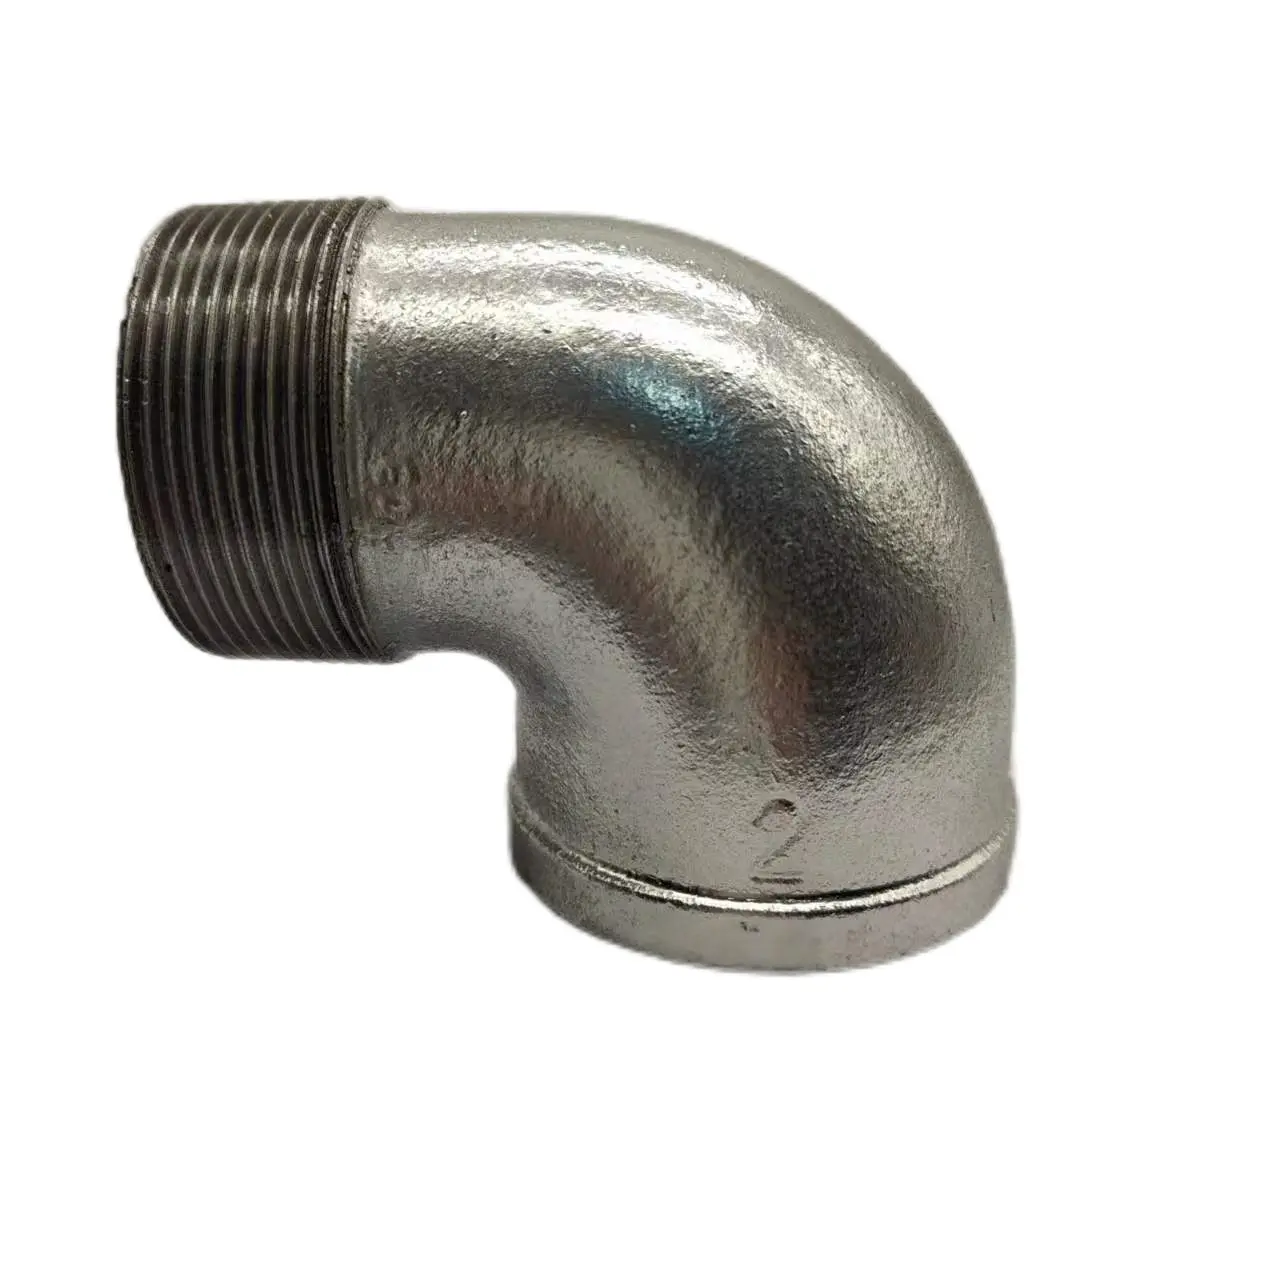 casting hot dipped galvanized iron pipe fittings street elbow 90 degrees for water gas connection Galvanized street elbow